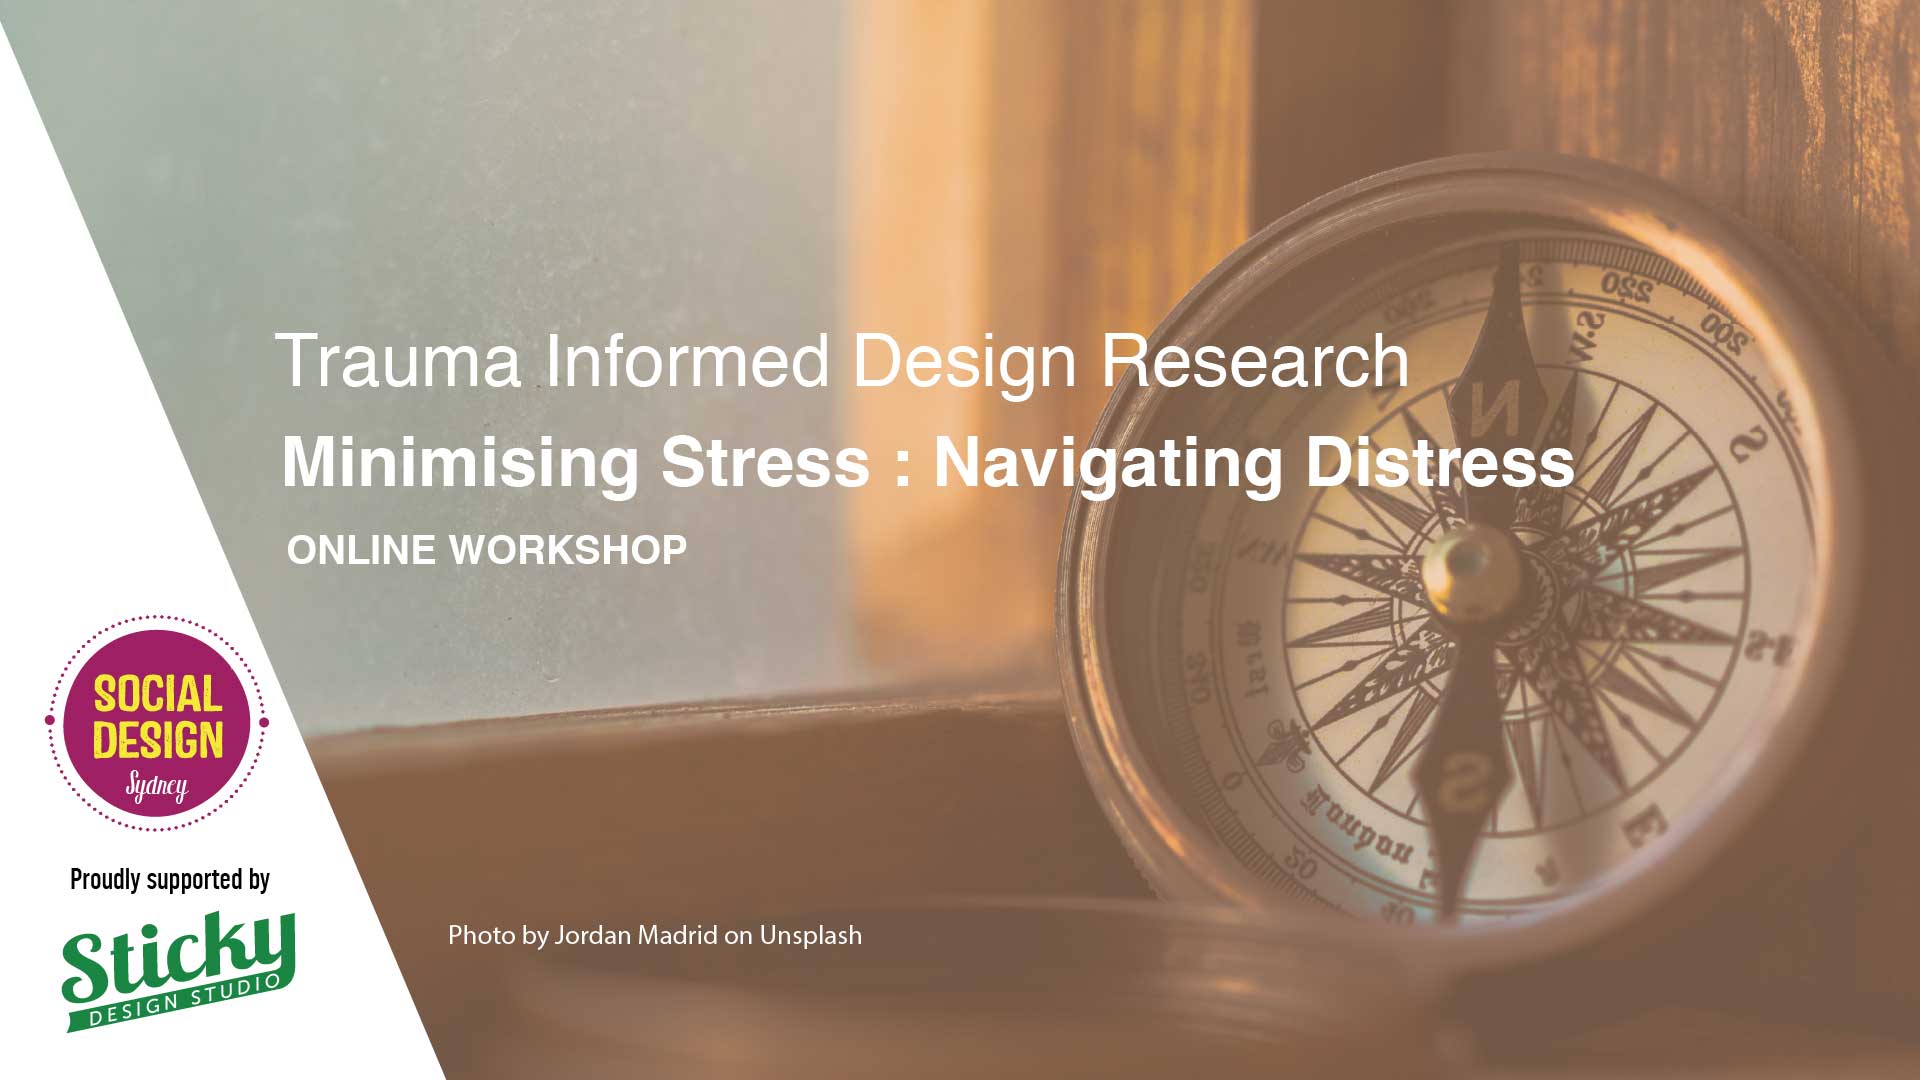 Trauma Informed Design Research - Minimising Stress : Navigating Distress online workshop. Social Design Sydney logo and proudly supported by Sticky Design Studio. Background image a compass against a window ledge with blue sky in the background.